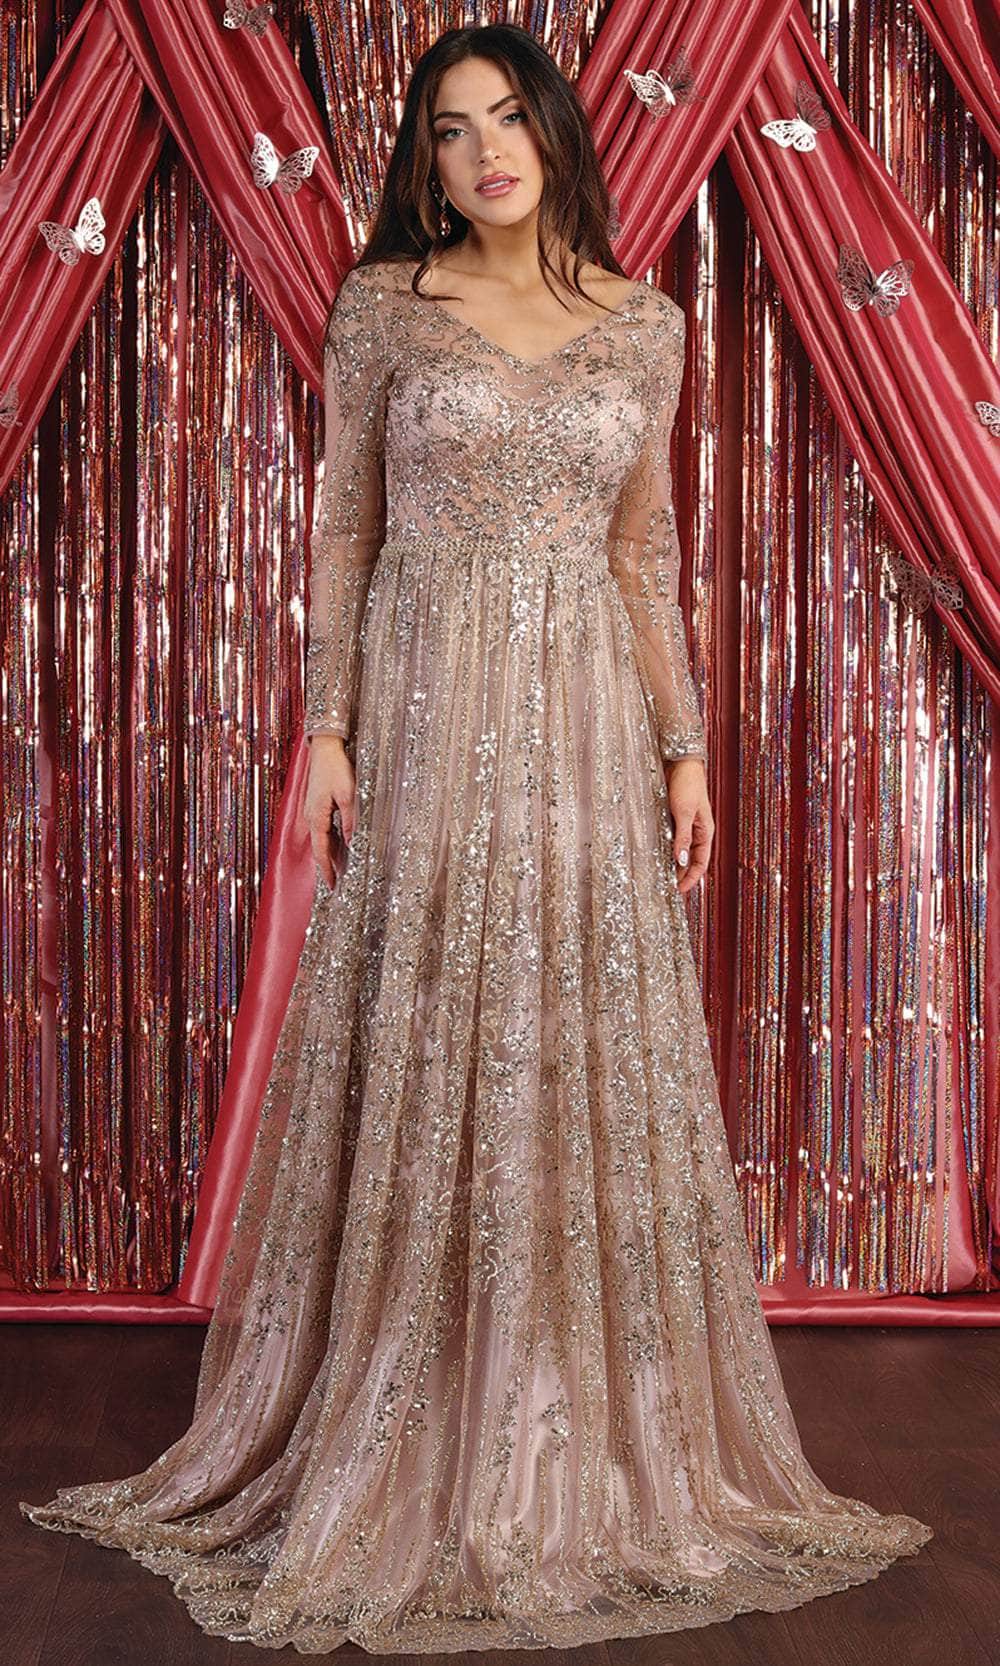 May Queen RQ7920 - Ornated Sheer Bodice Long Sleeve A Line Dress Gold